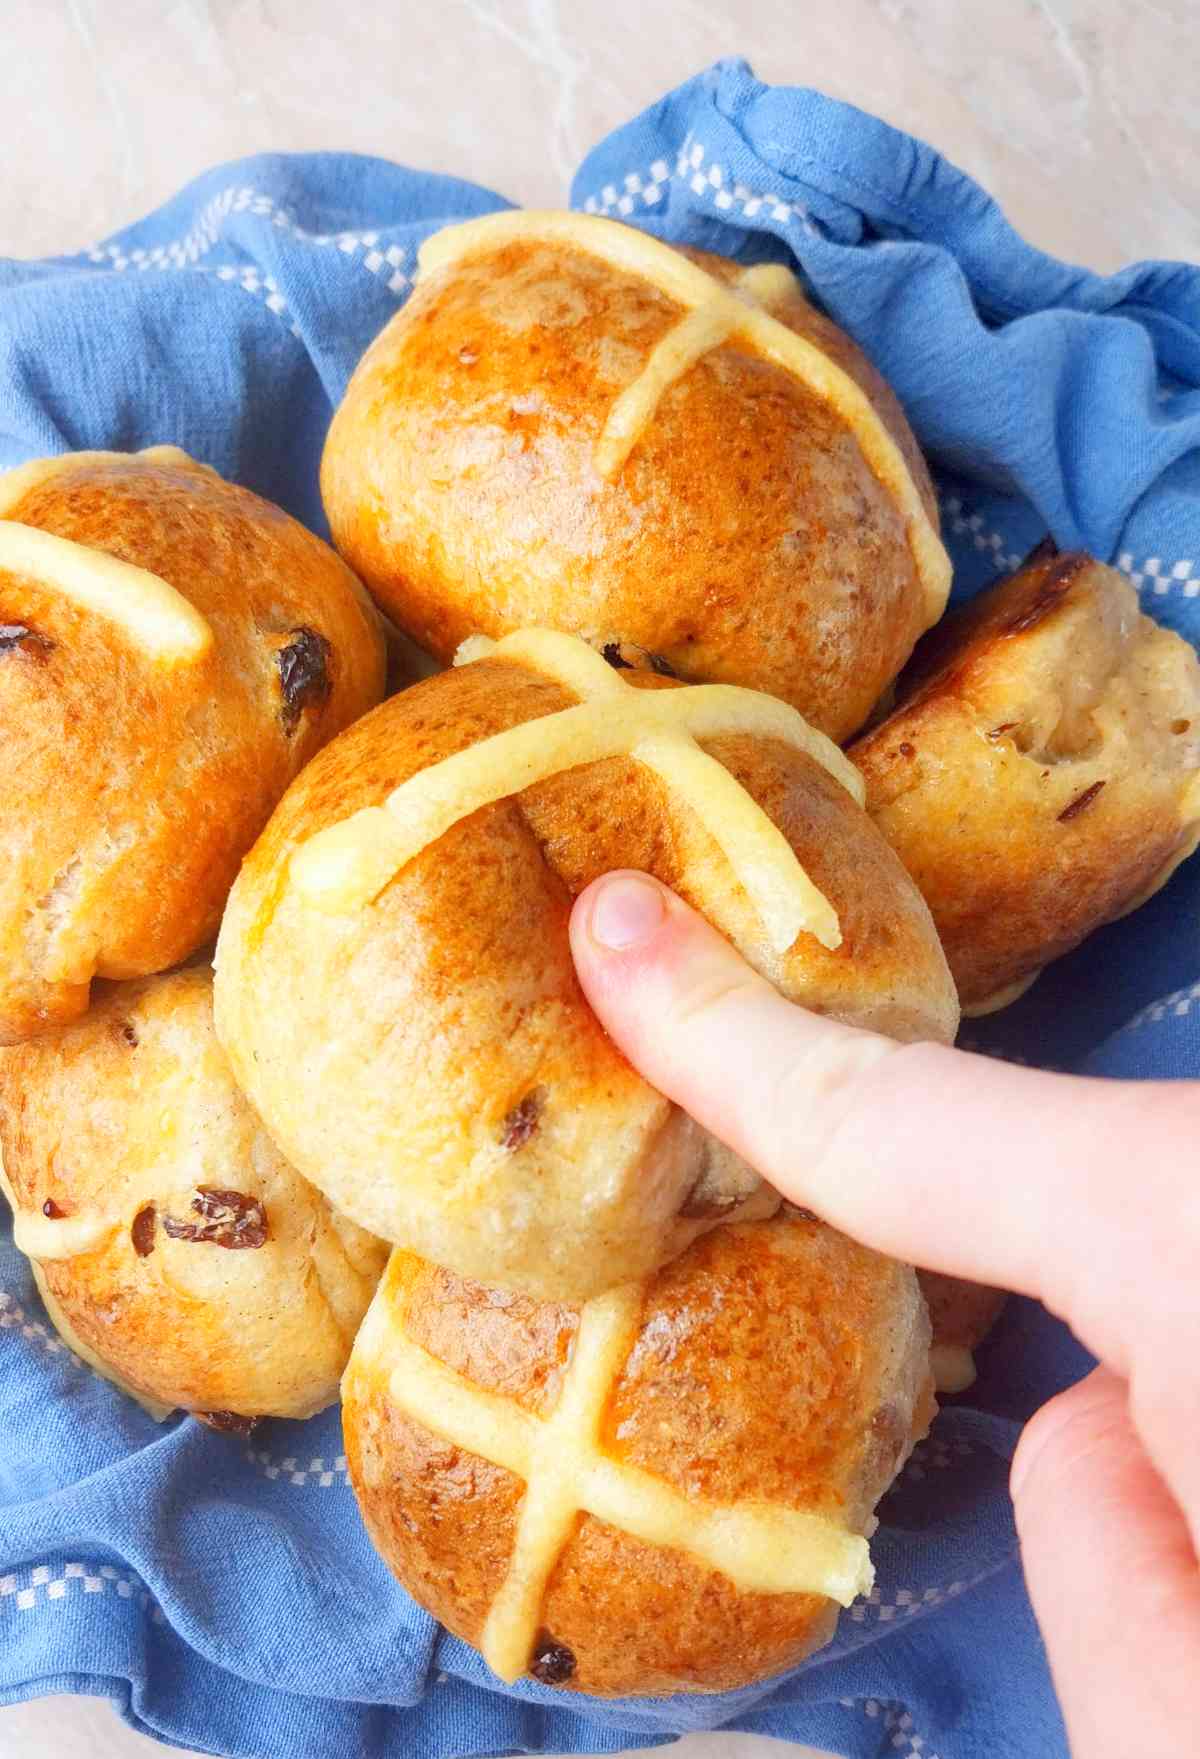 Gluten-free sourdough hot cross buns in a bowl and a kitchen towel.